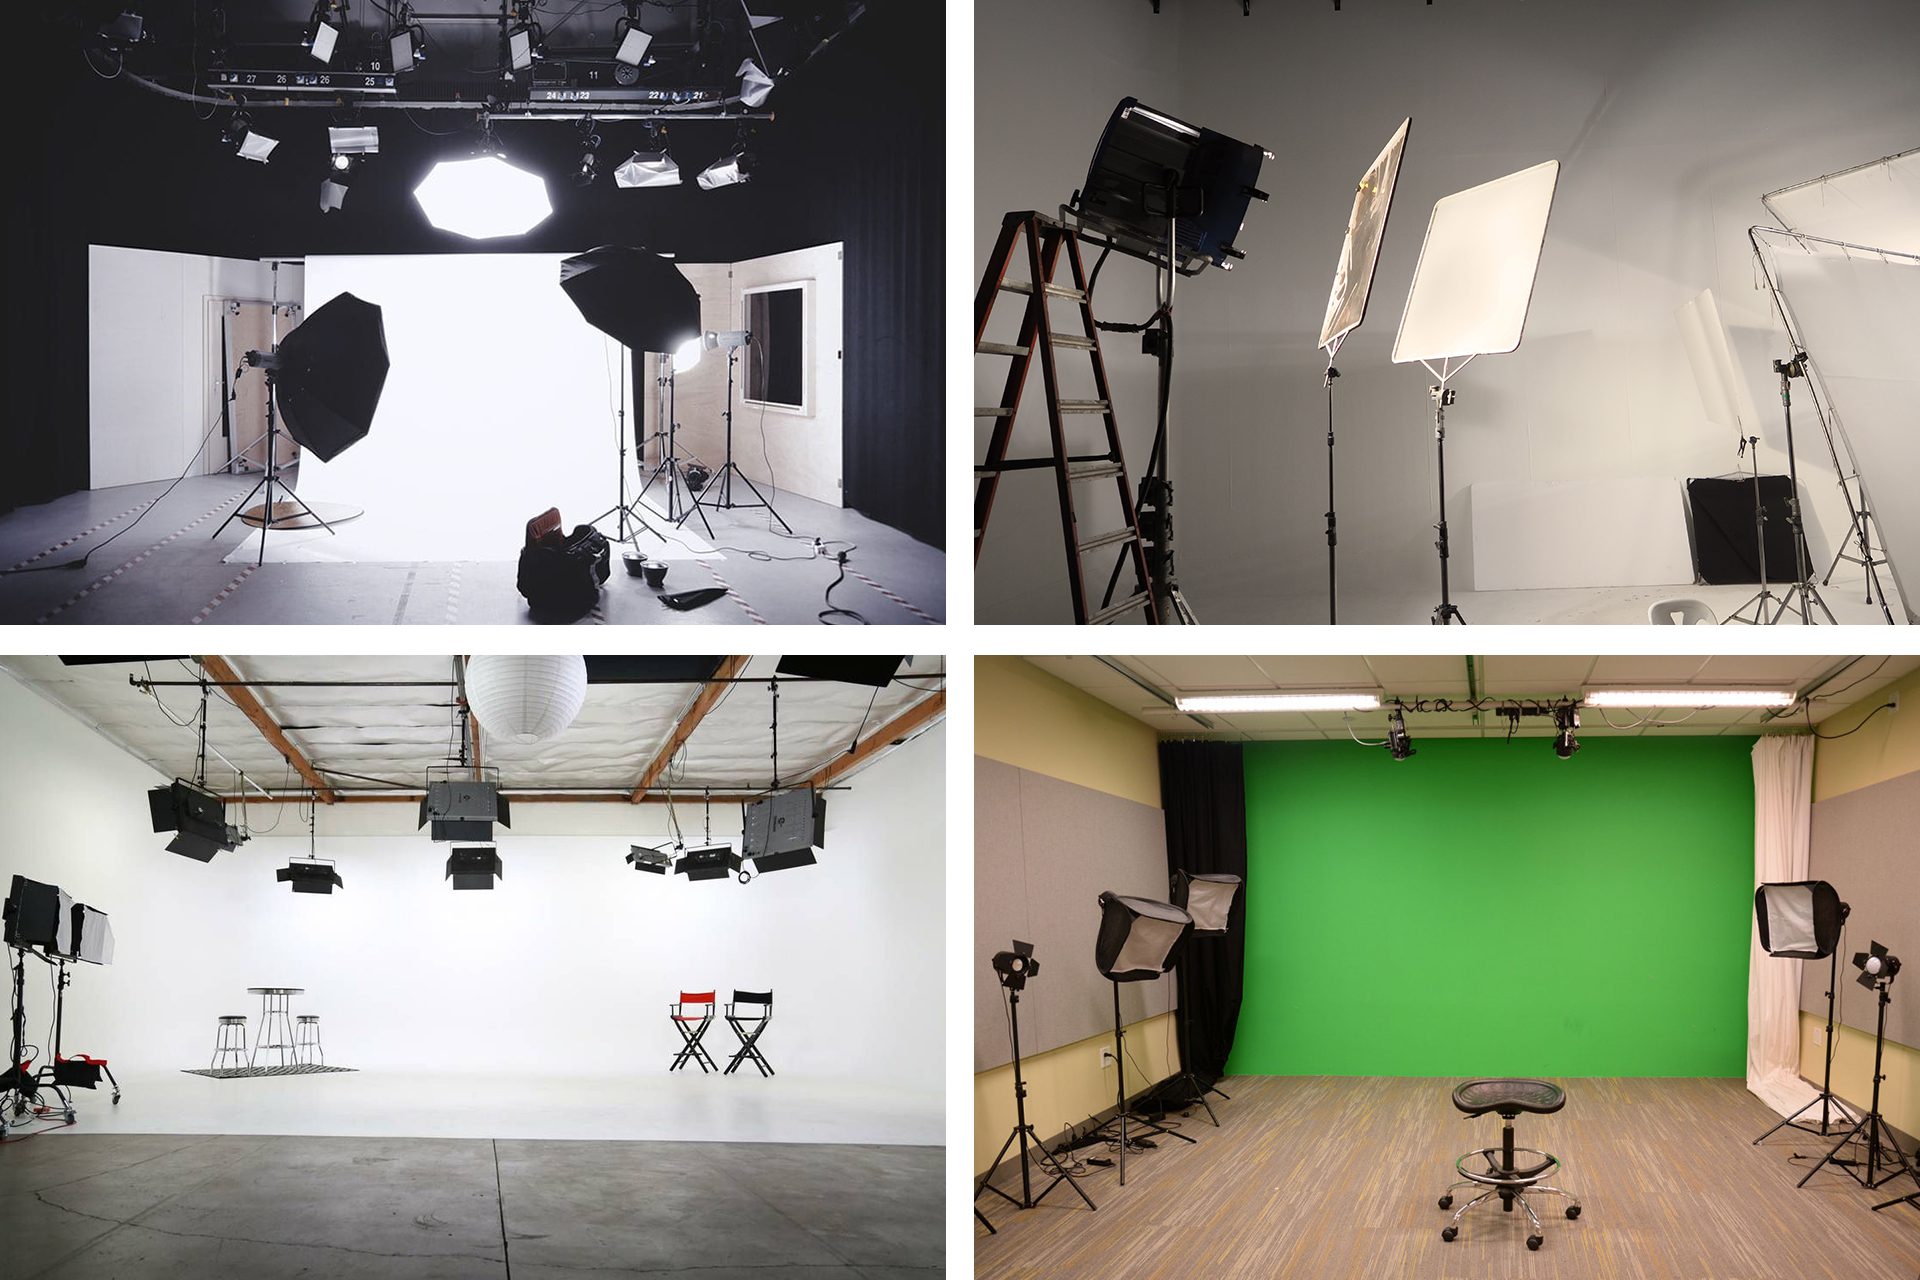 Best Professional Video Studio Setup for Any Budget